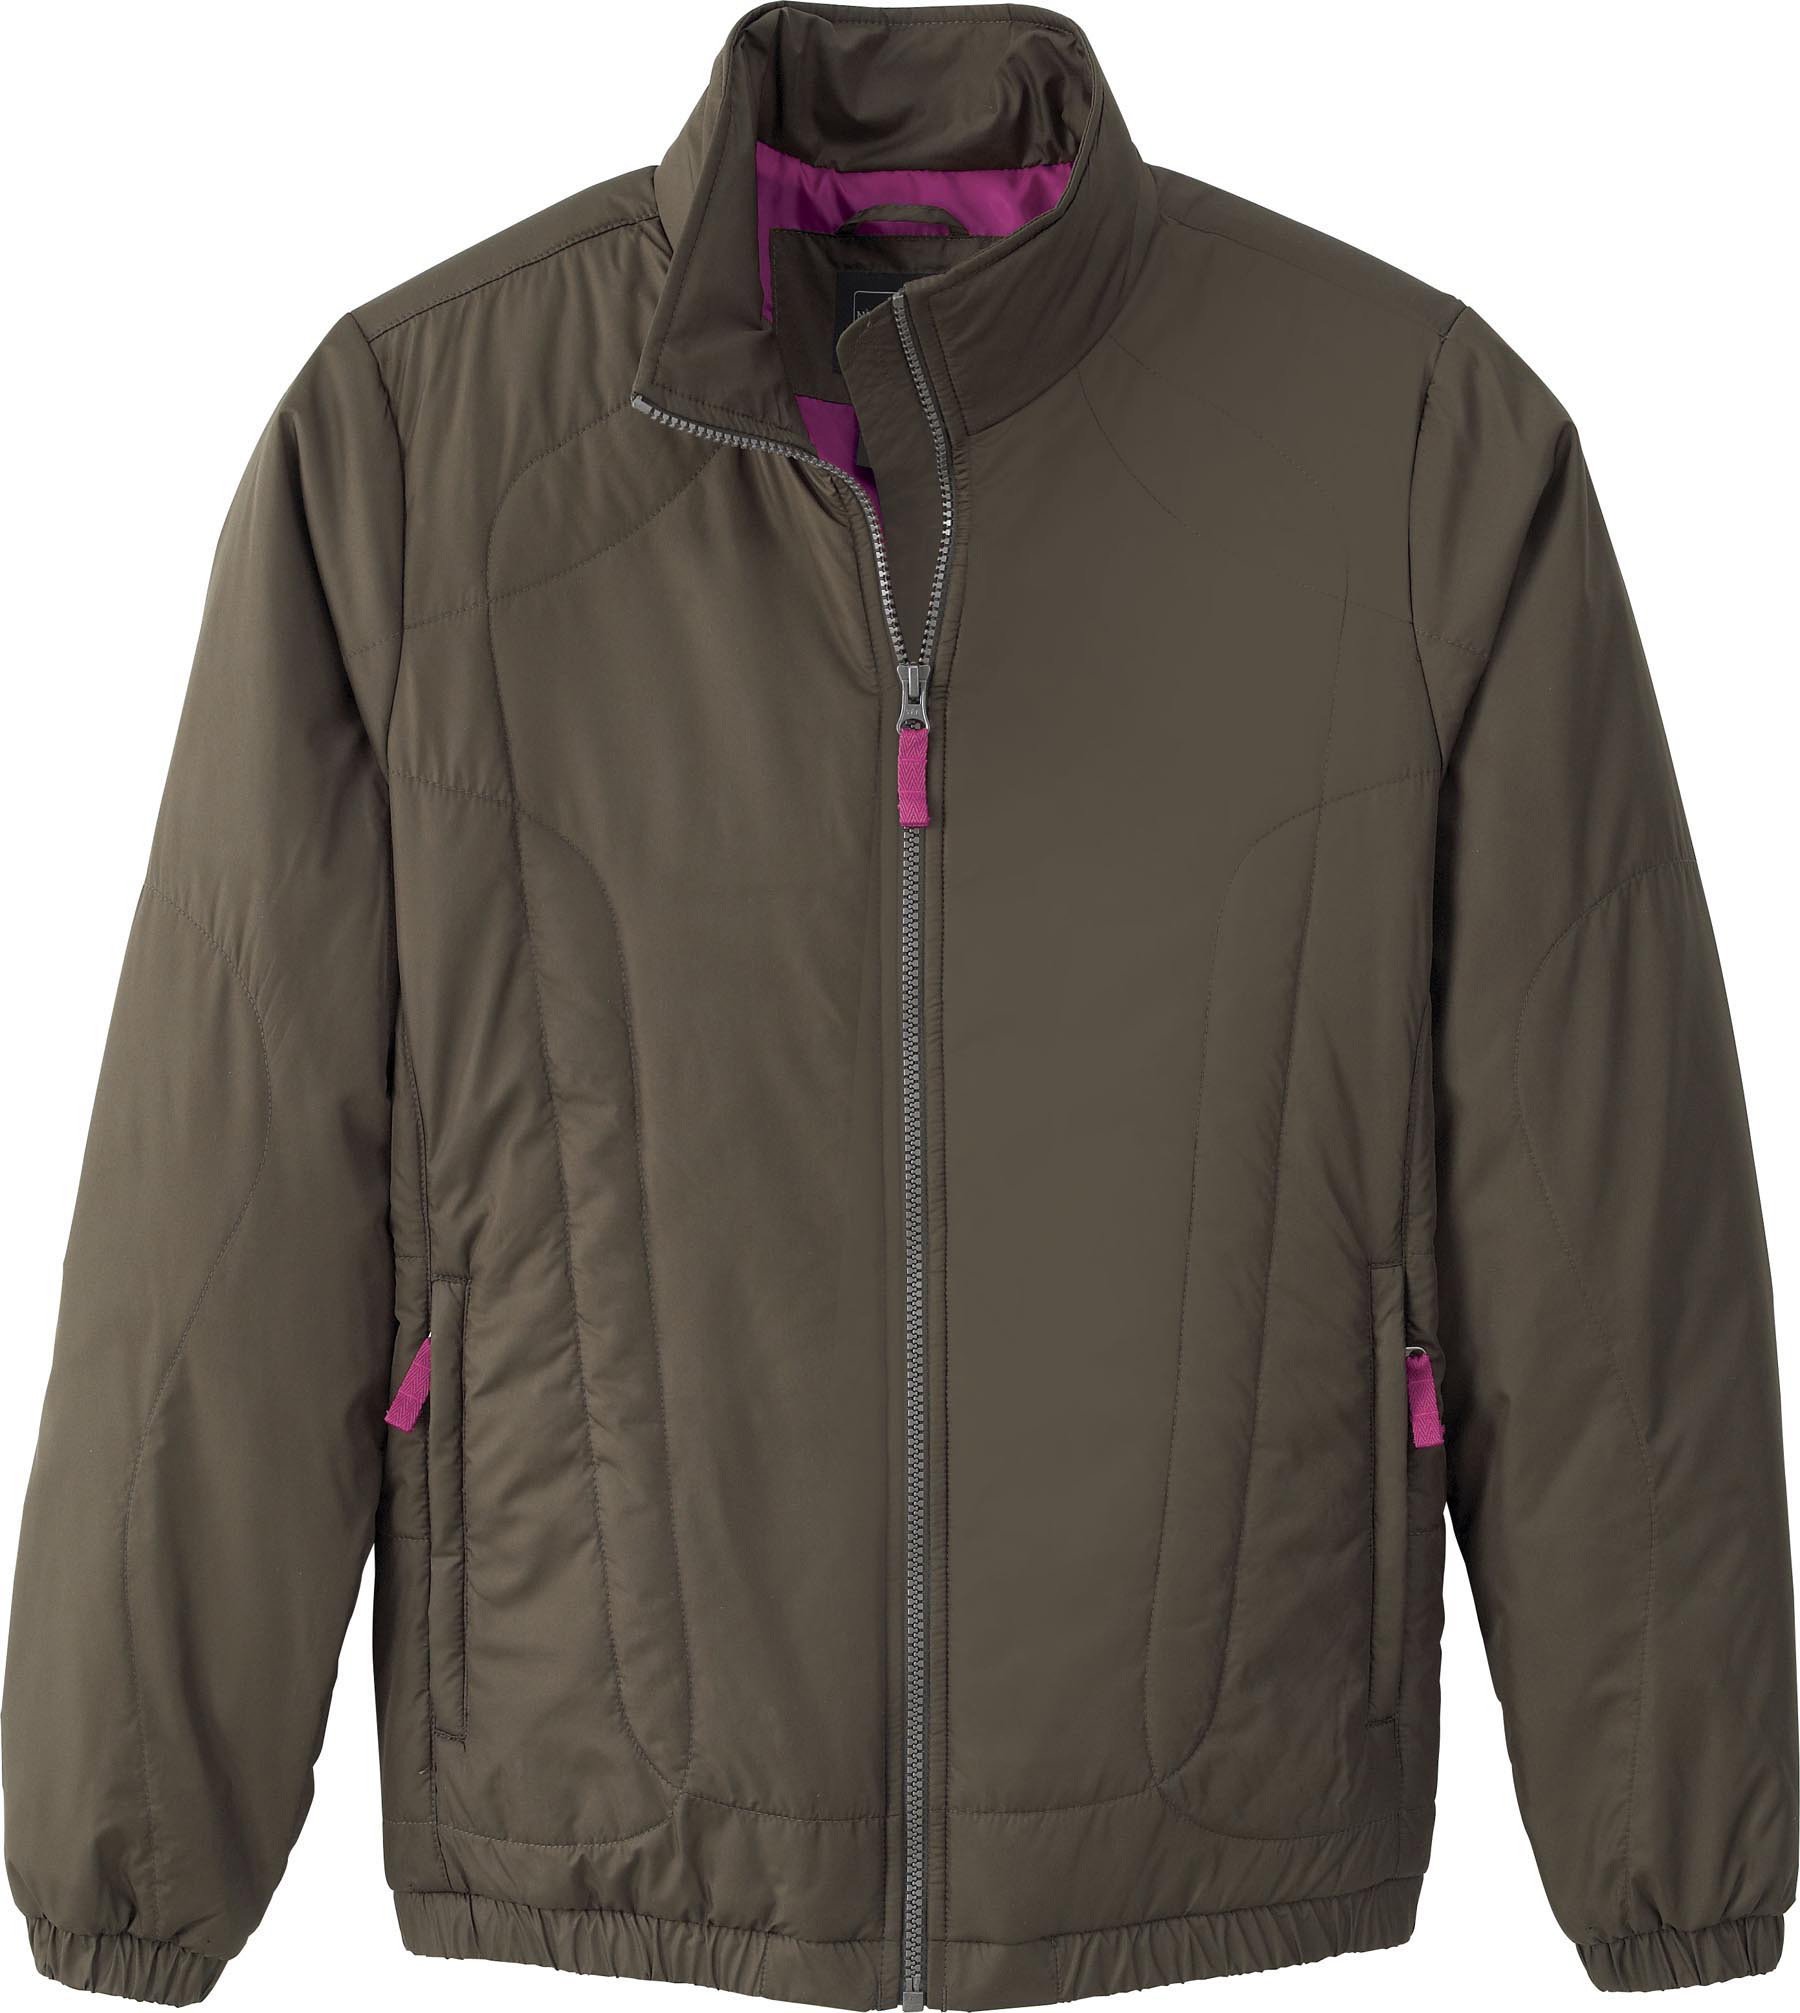 Ash City Insulated 78640 - Ladies' Insulated High-Count Polyester Jacket